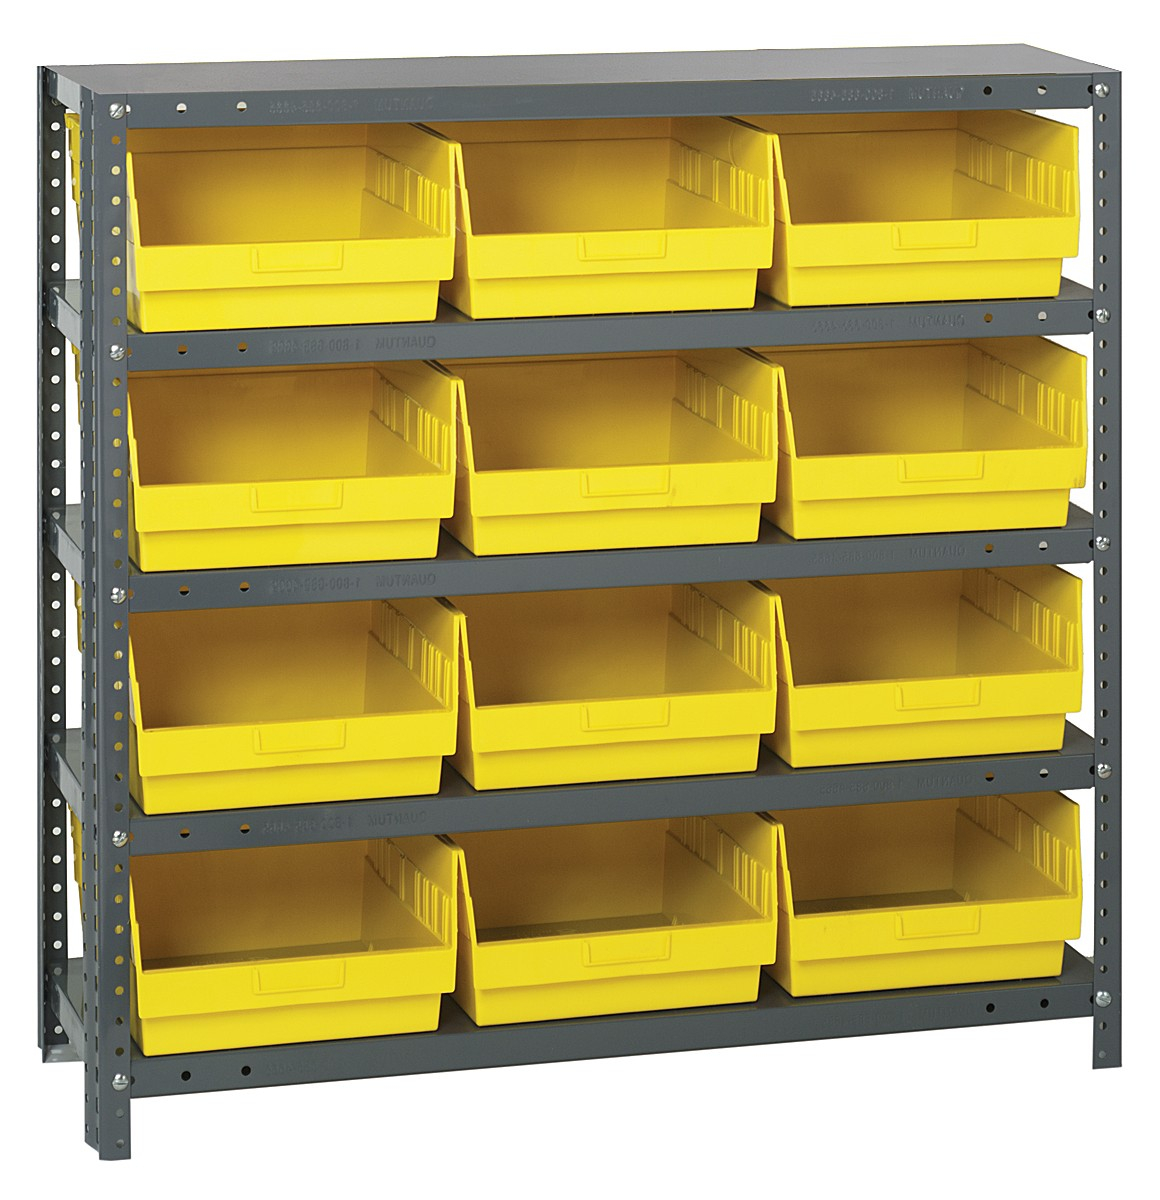 1839 210 Steel Shelving Shelf Bin System Quantum Storage intended for proportions 1160 X 1200